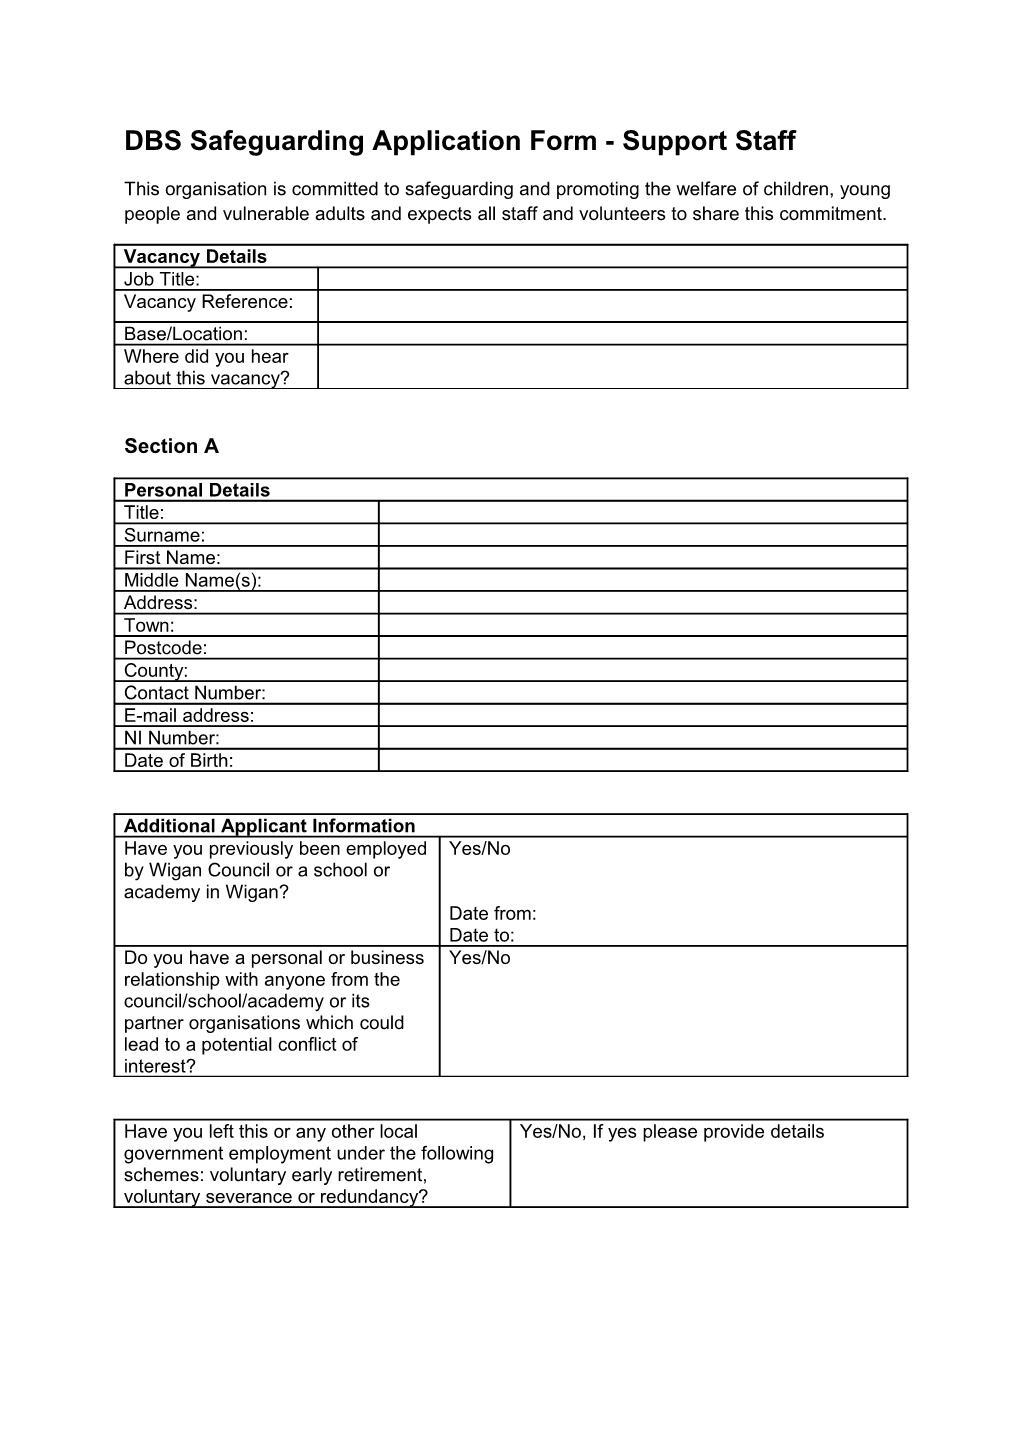 DBS Safeguarding Application Form- Support Staff